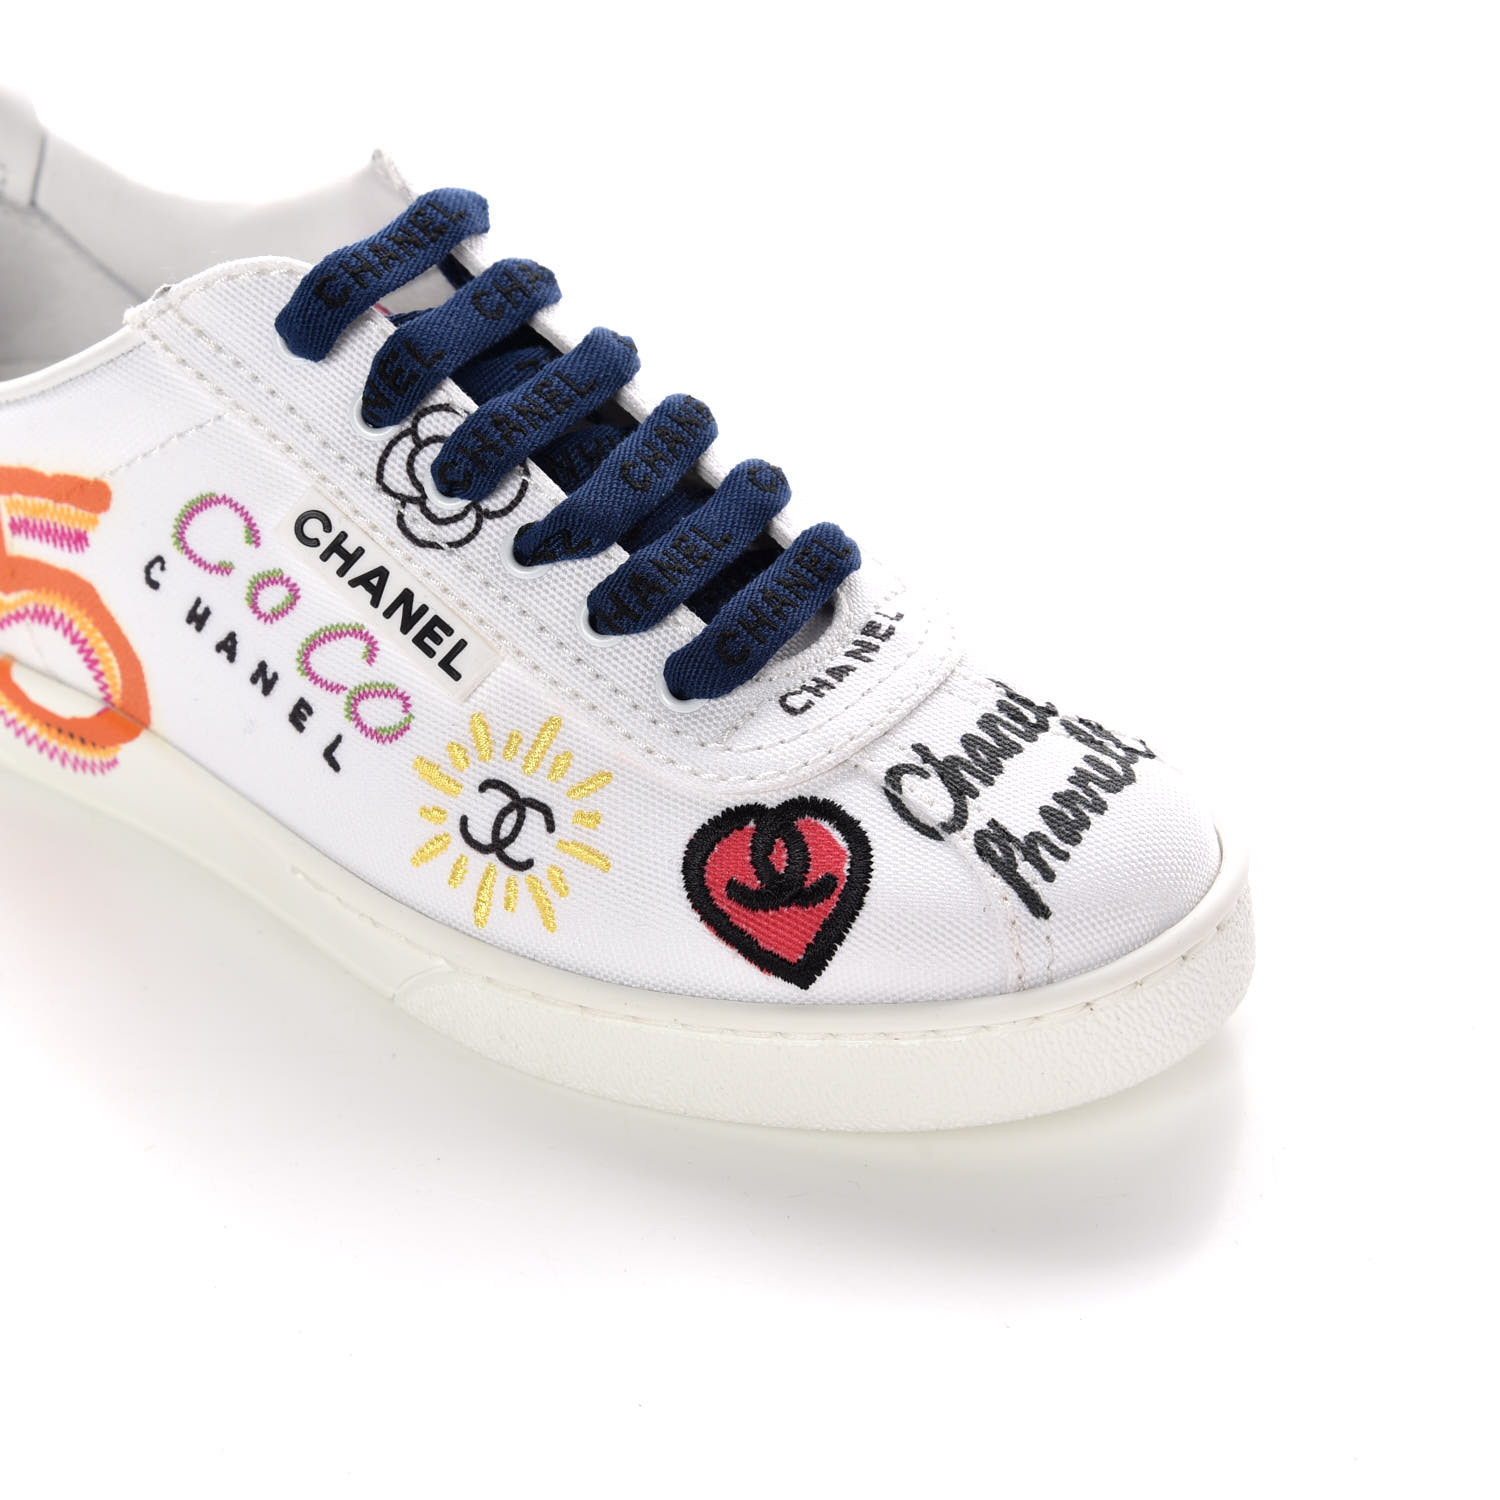 CHANEL x Pharrell Williams Canvas Womens Sneakers 35 White 364600